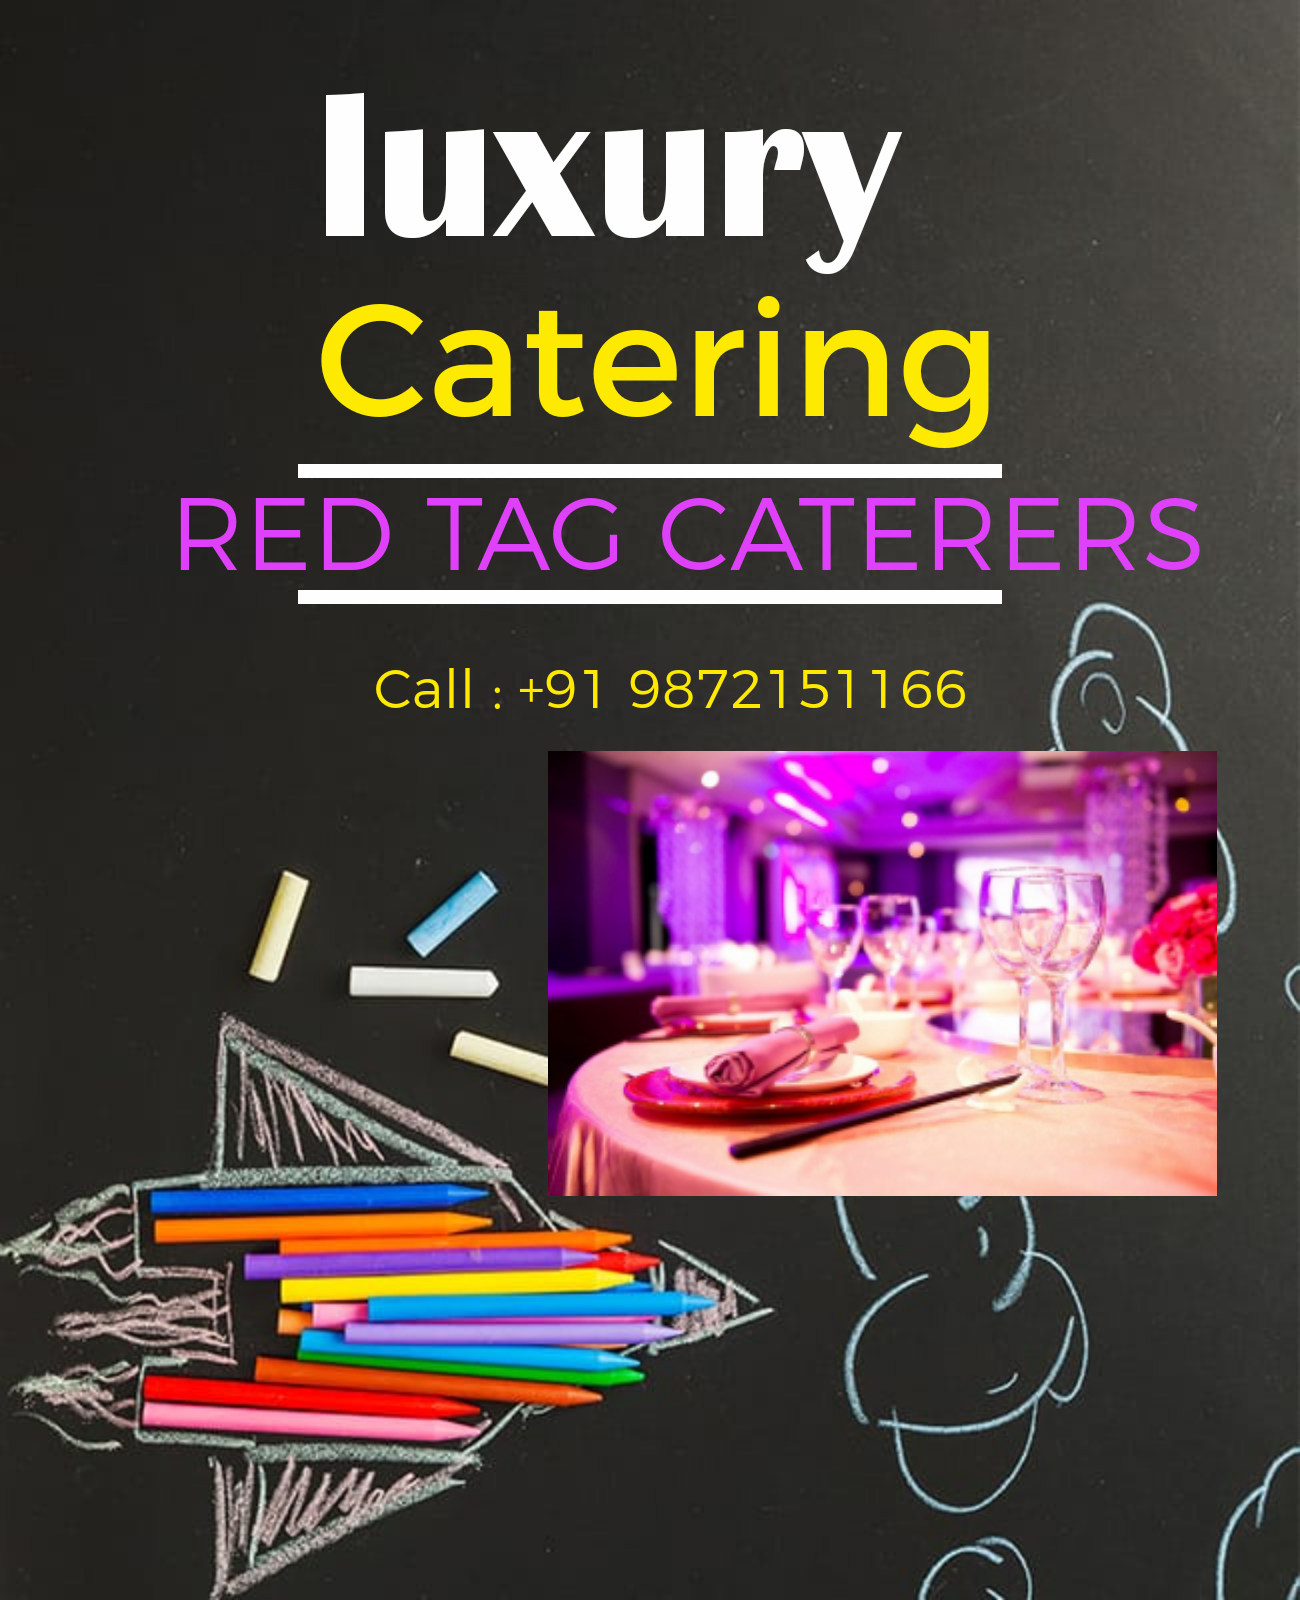 Professional catering and events planner in Chandigarh  | Red Tag Caterers | Professional catering and events planner in Chandigarh, best caterers in Chandigarh, top caterer in Chandigarh, outdoor catering service in Chandigarh  - GL44757